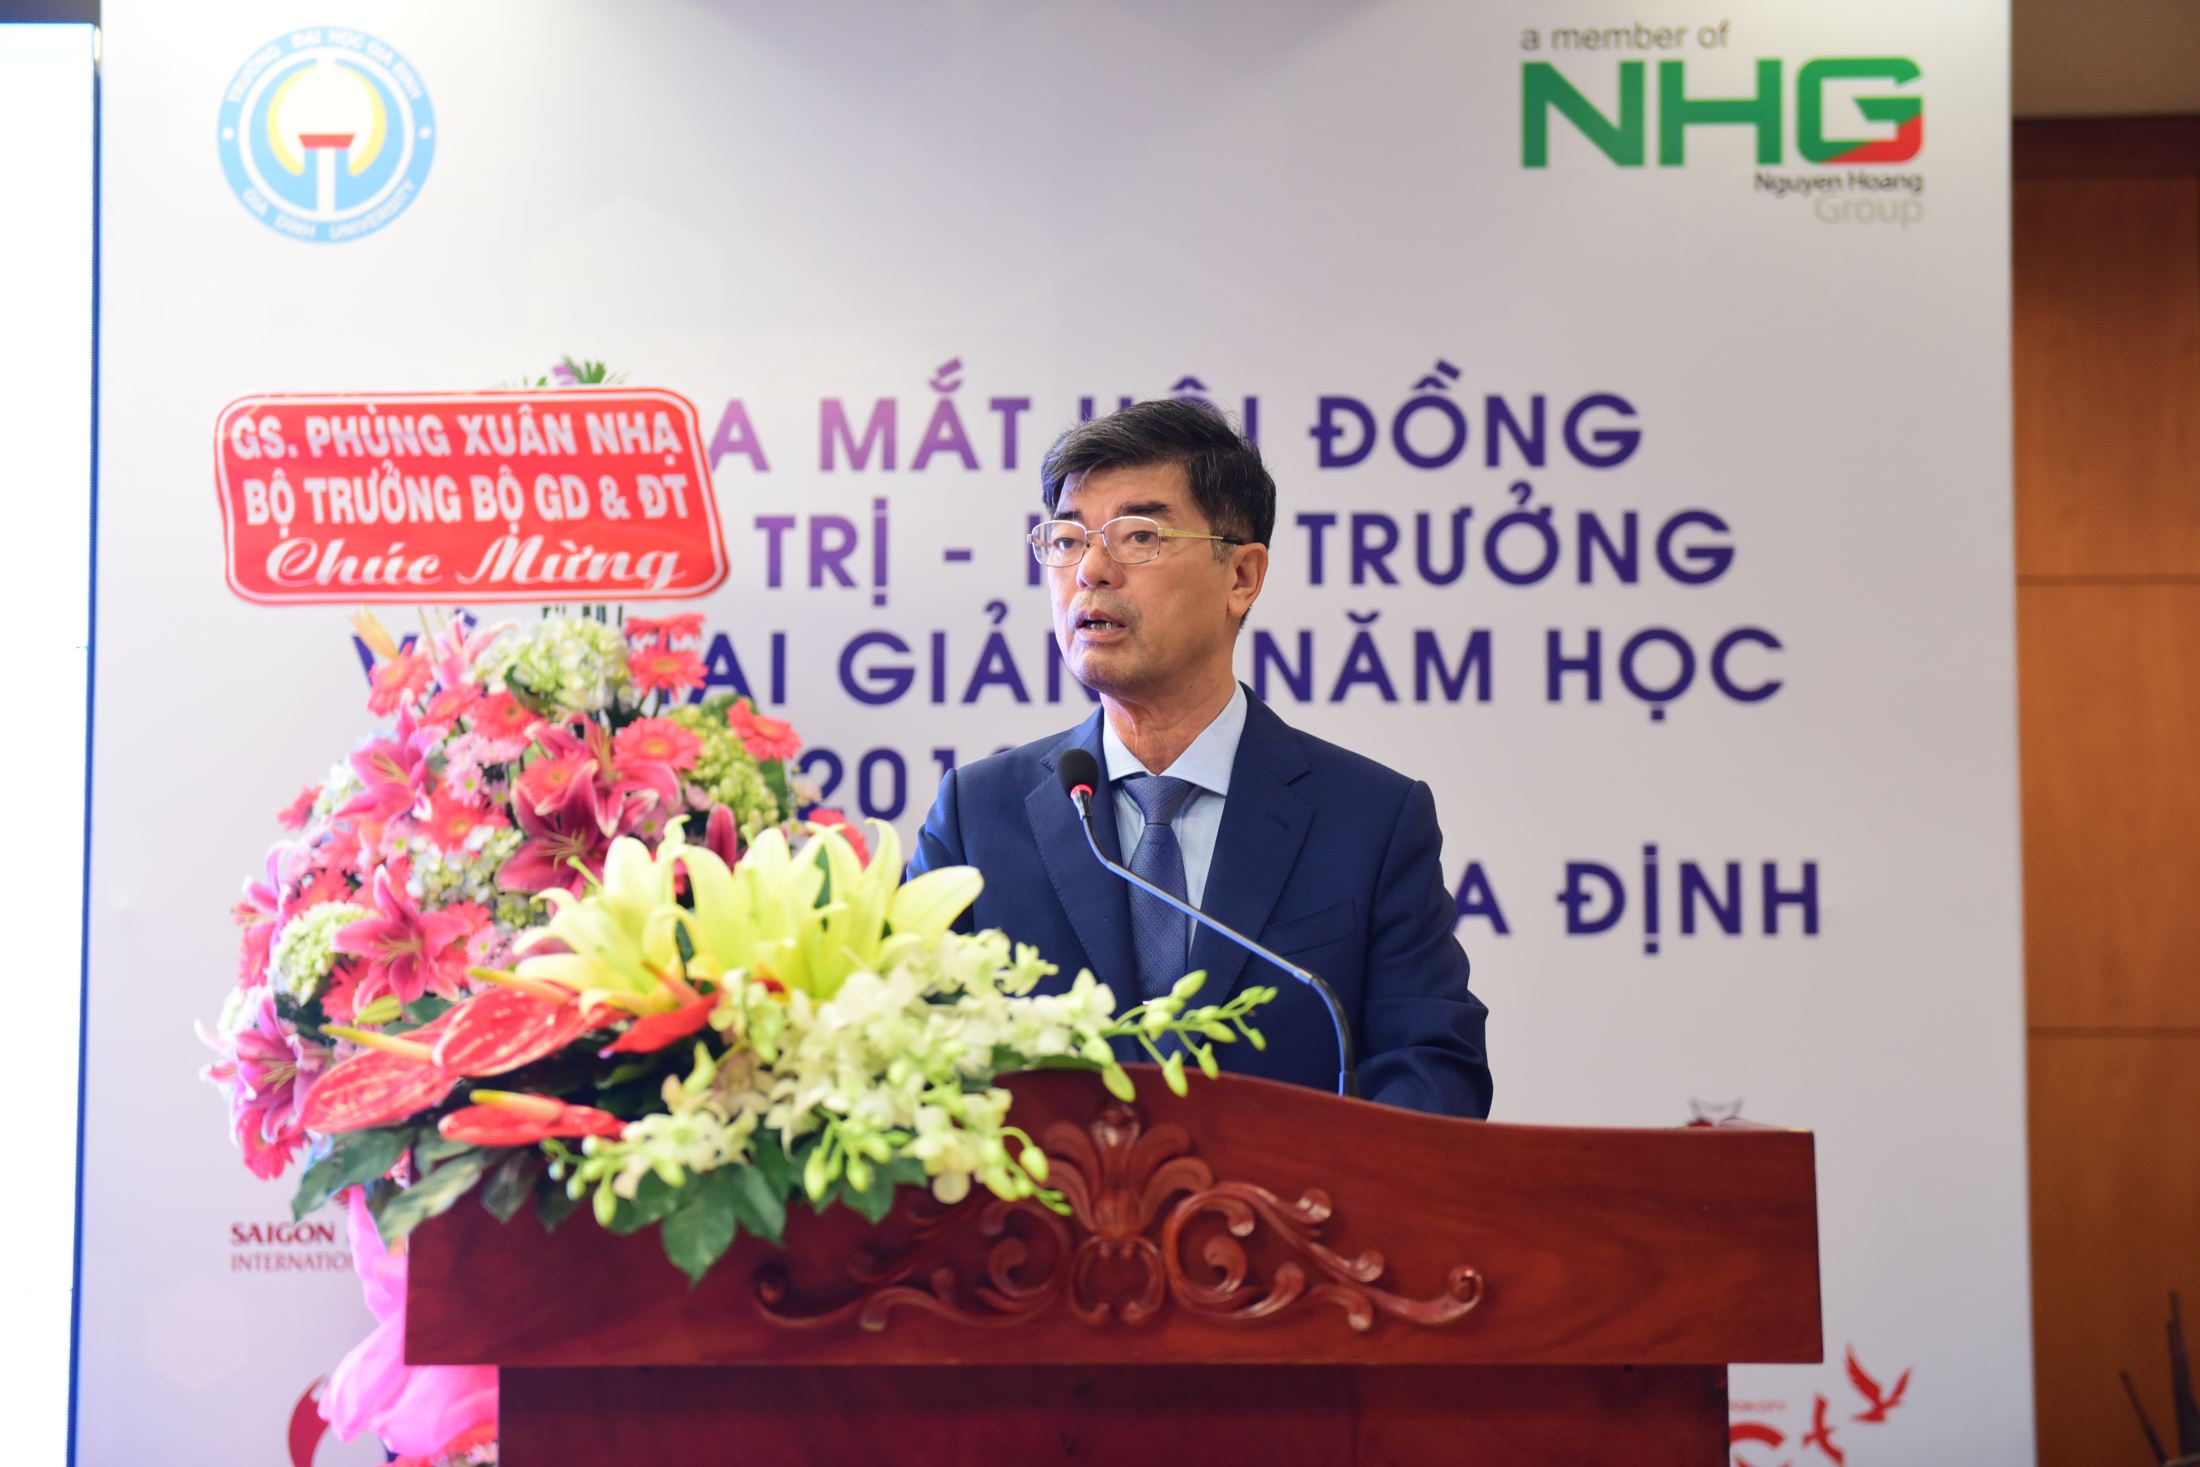 Assoc. Prof. Dr. Thai Ba Can, chairman of Gia Dinh University speaking at the ceremony.